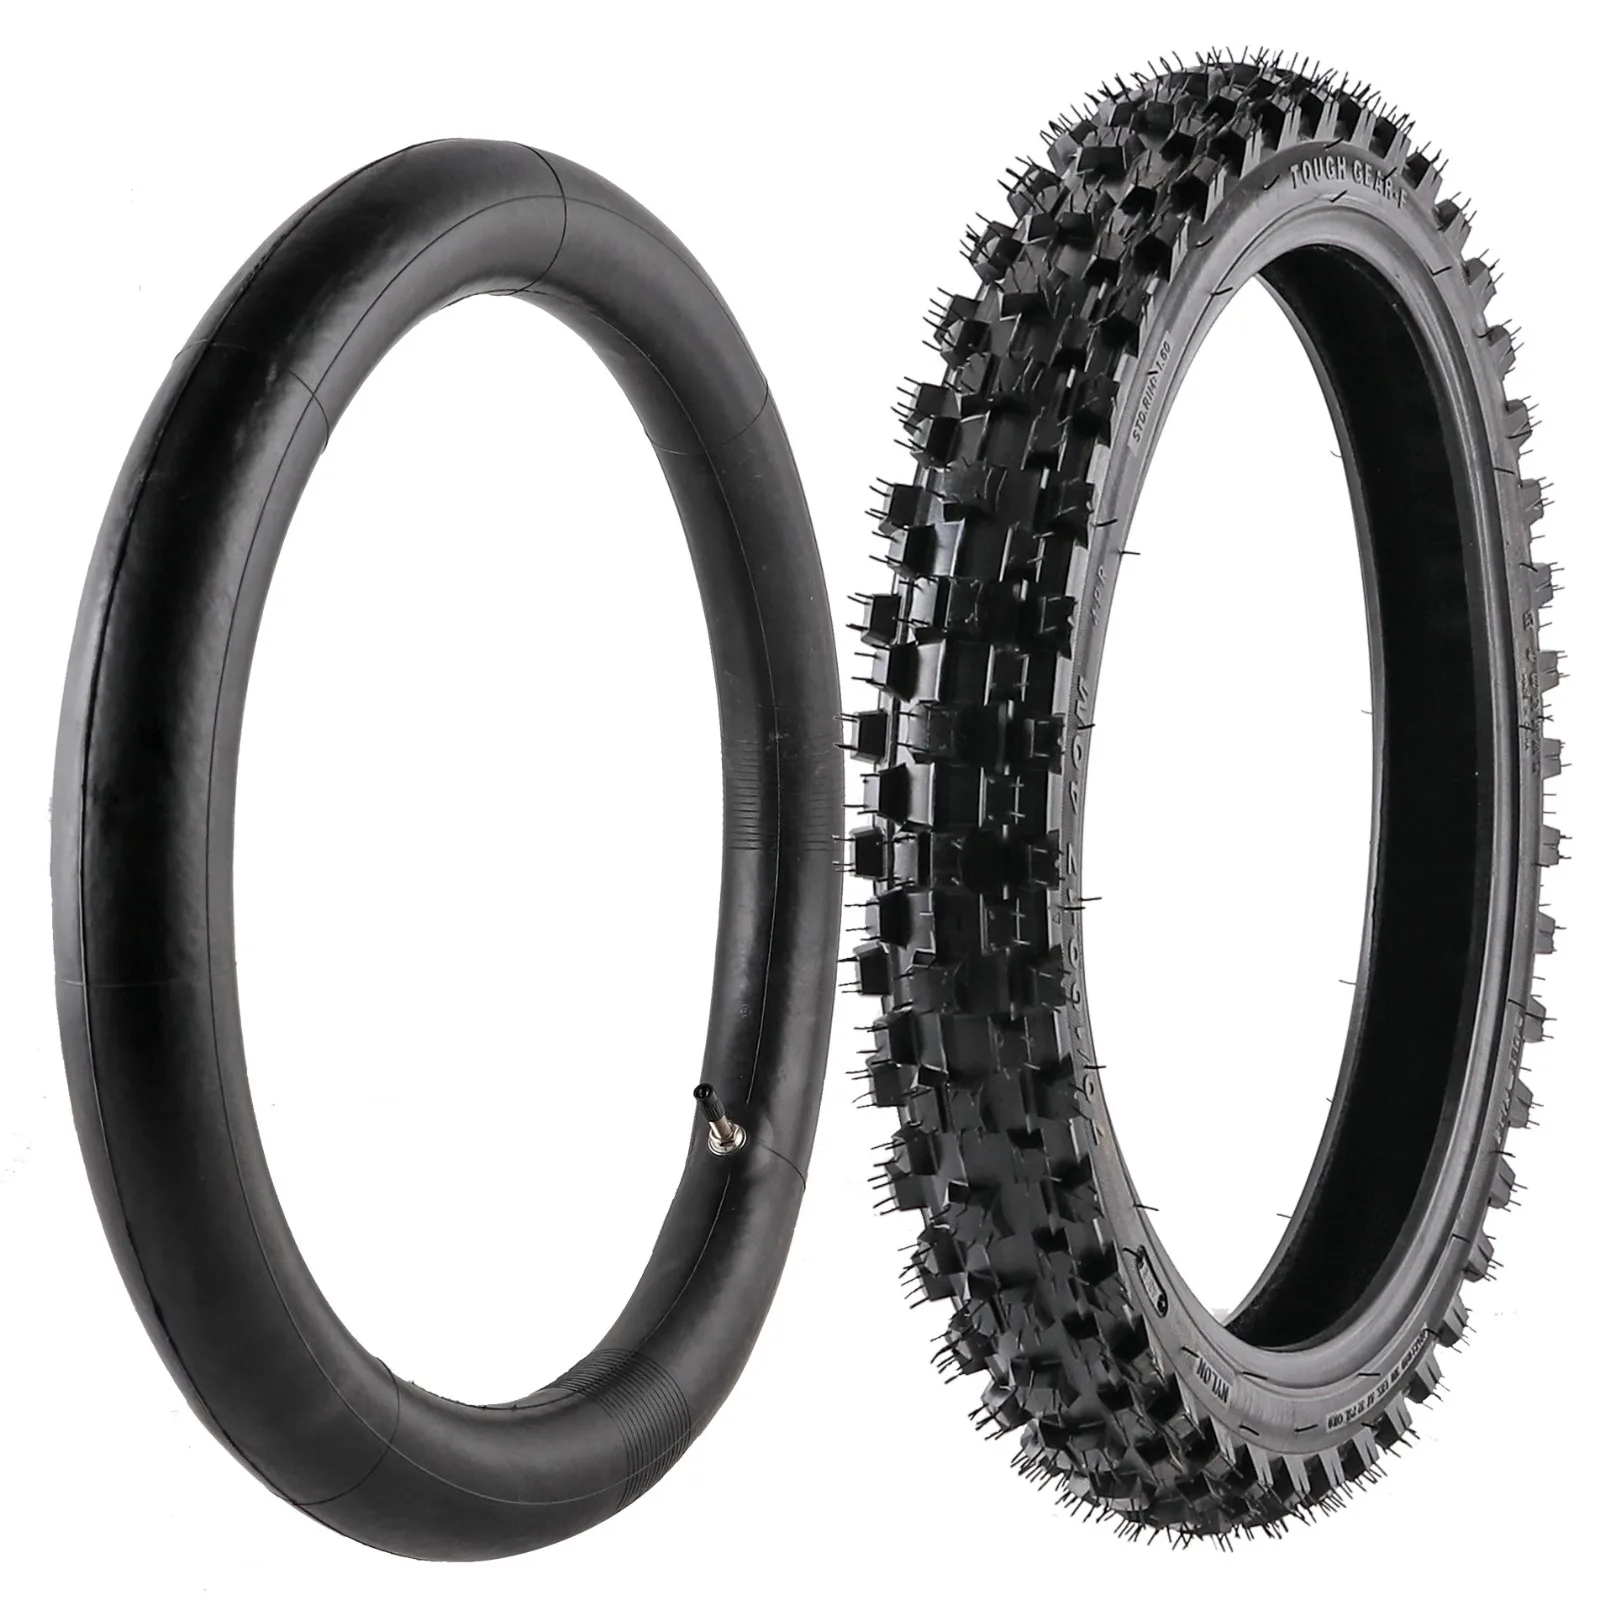 WPHMOTO 60/100-14 Knobby Tire With Tube for Dirt Bikes Pit Pro Trail 